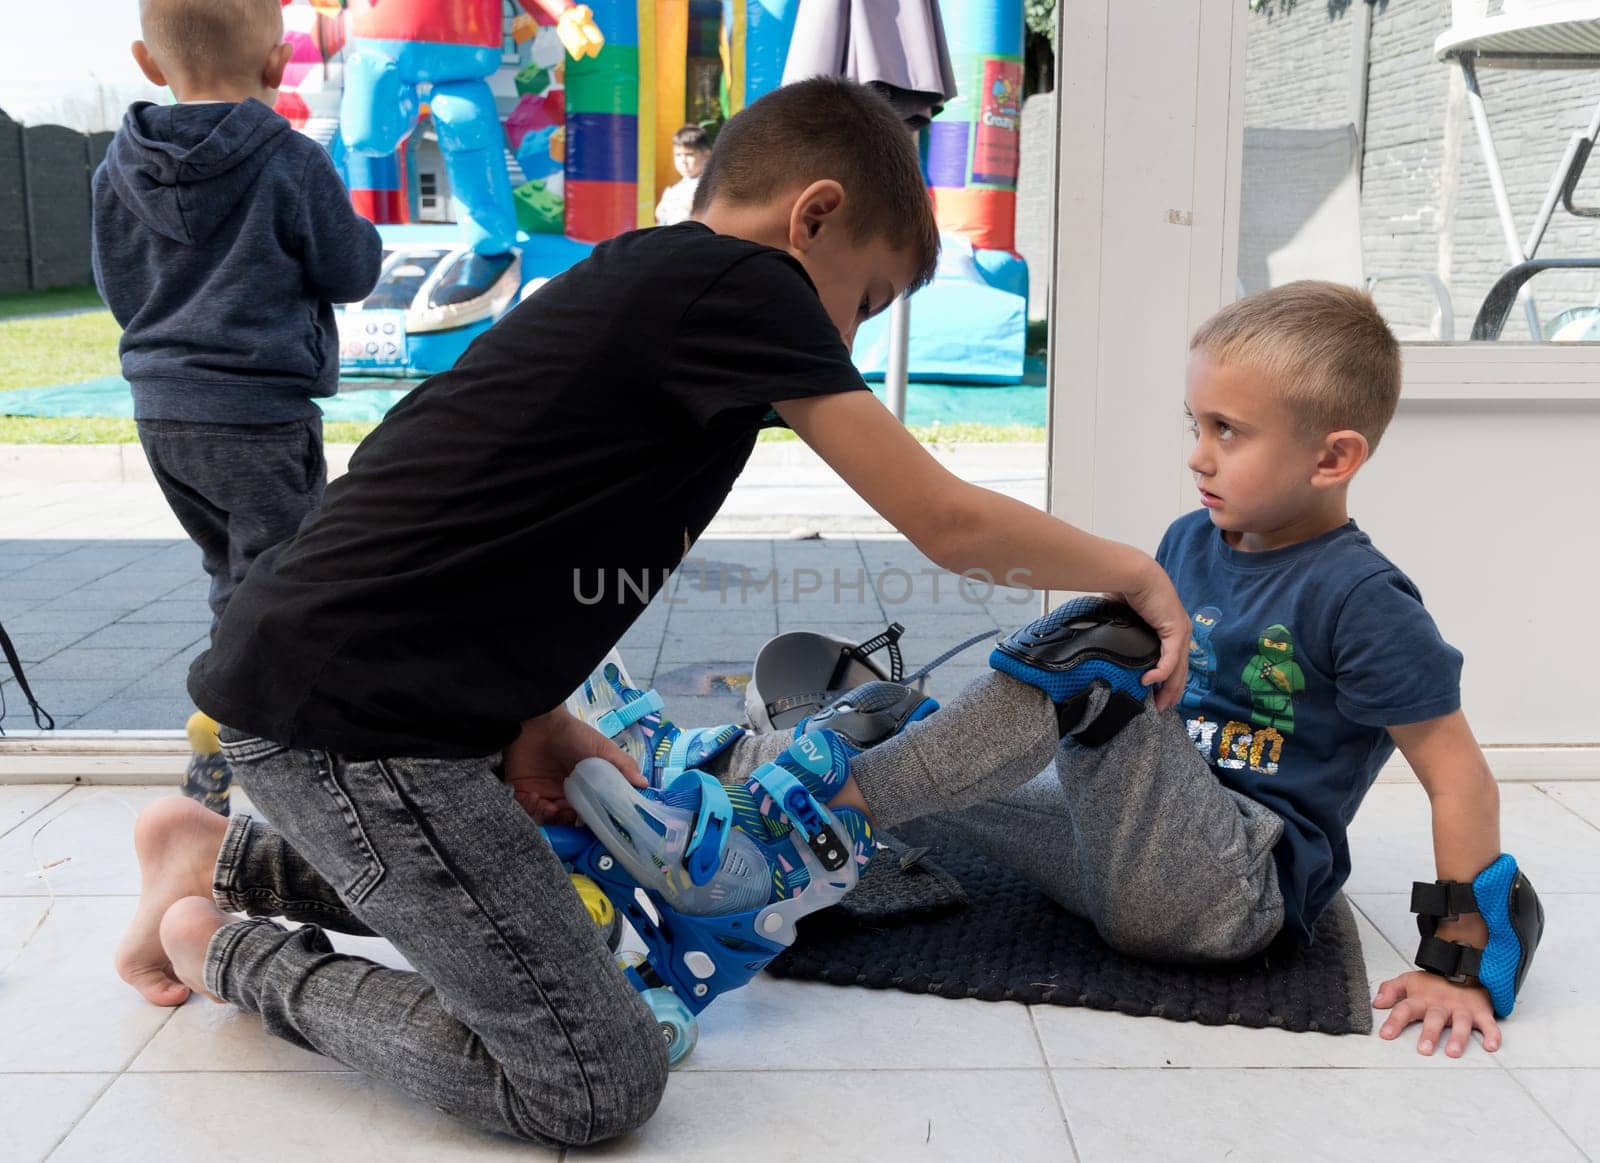 best friend helping his friend put on roller skates as a birthday gift, fun day with friends,a group of children doing sports independently, High quality photo